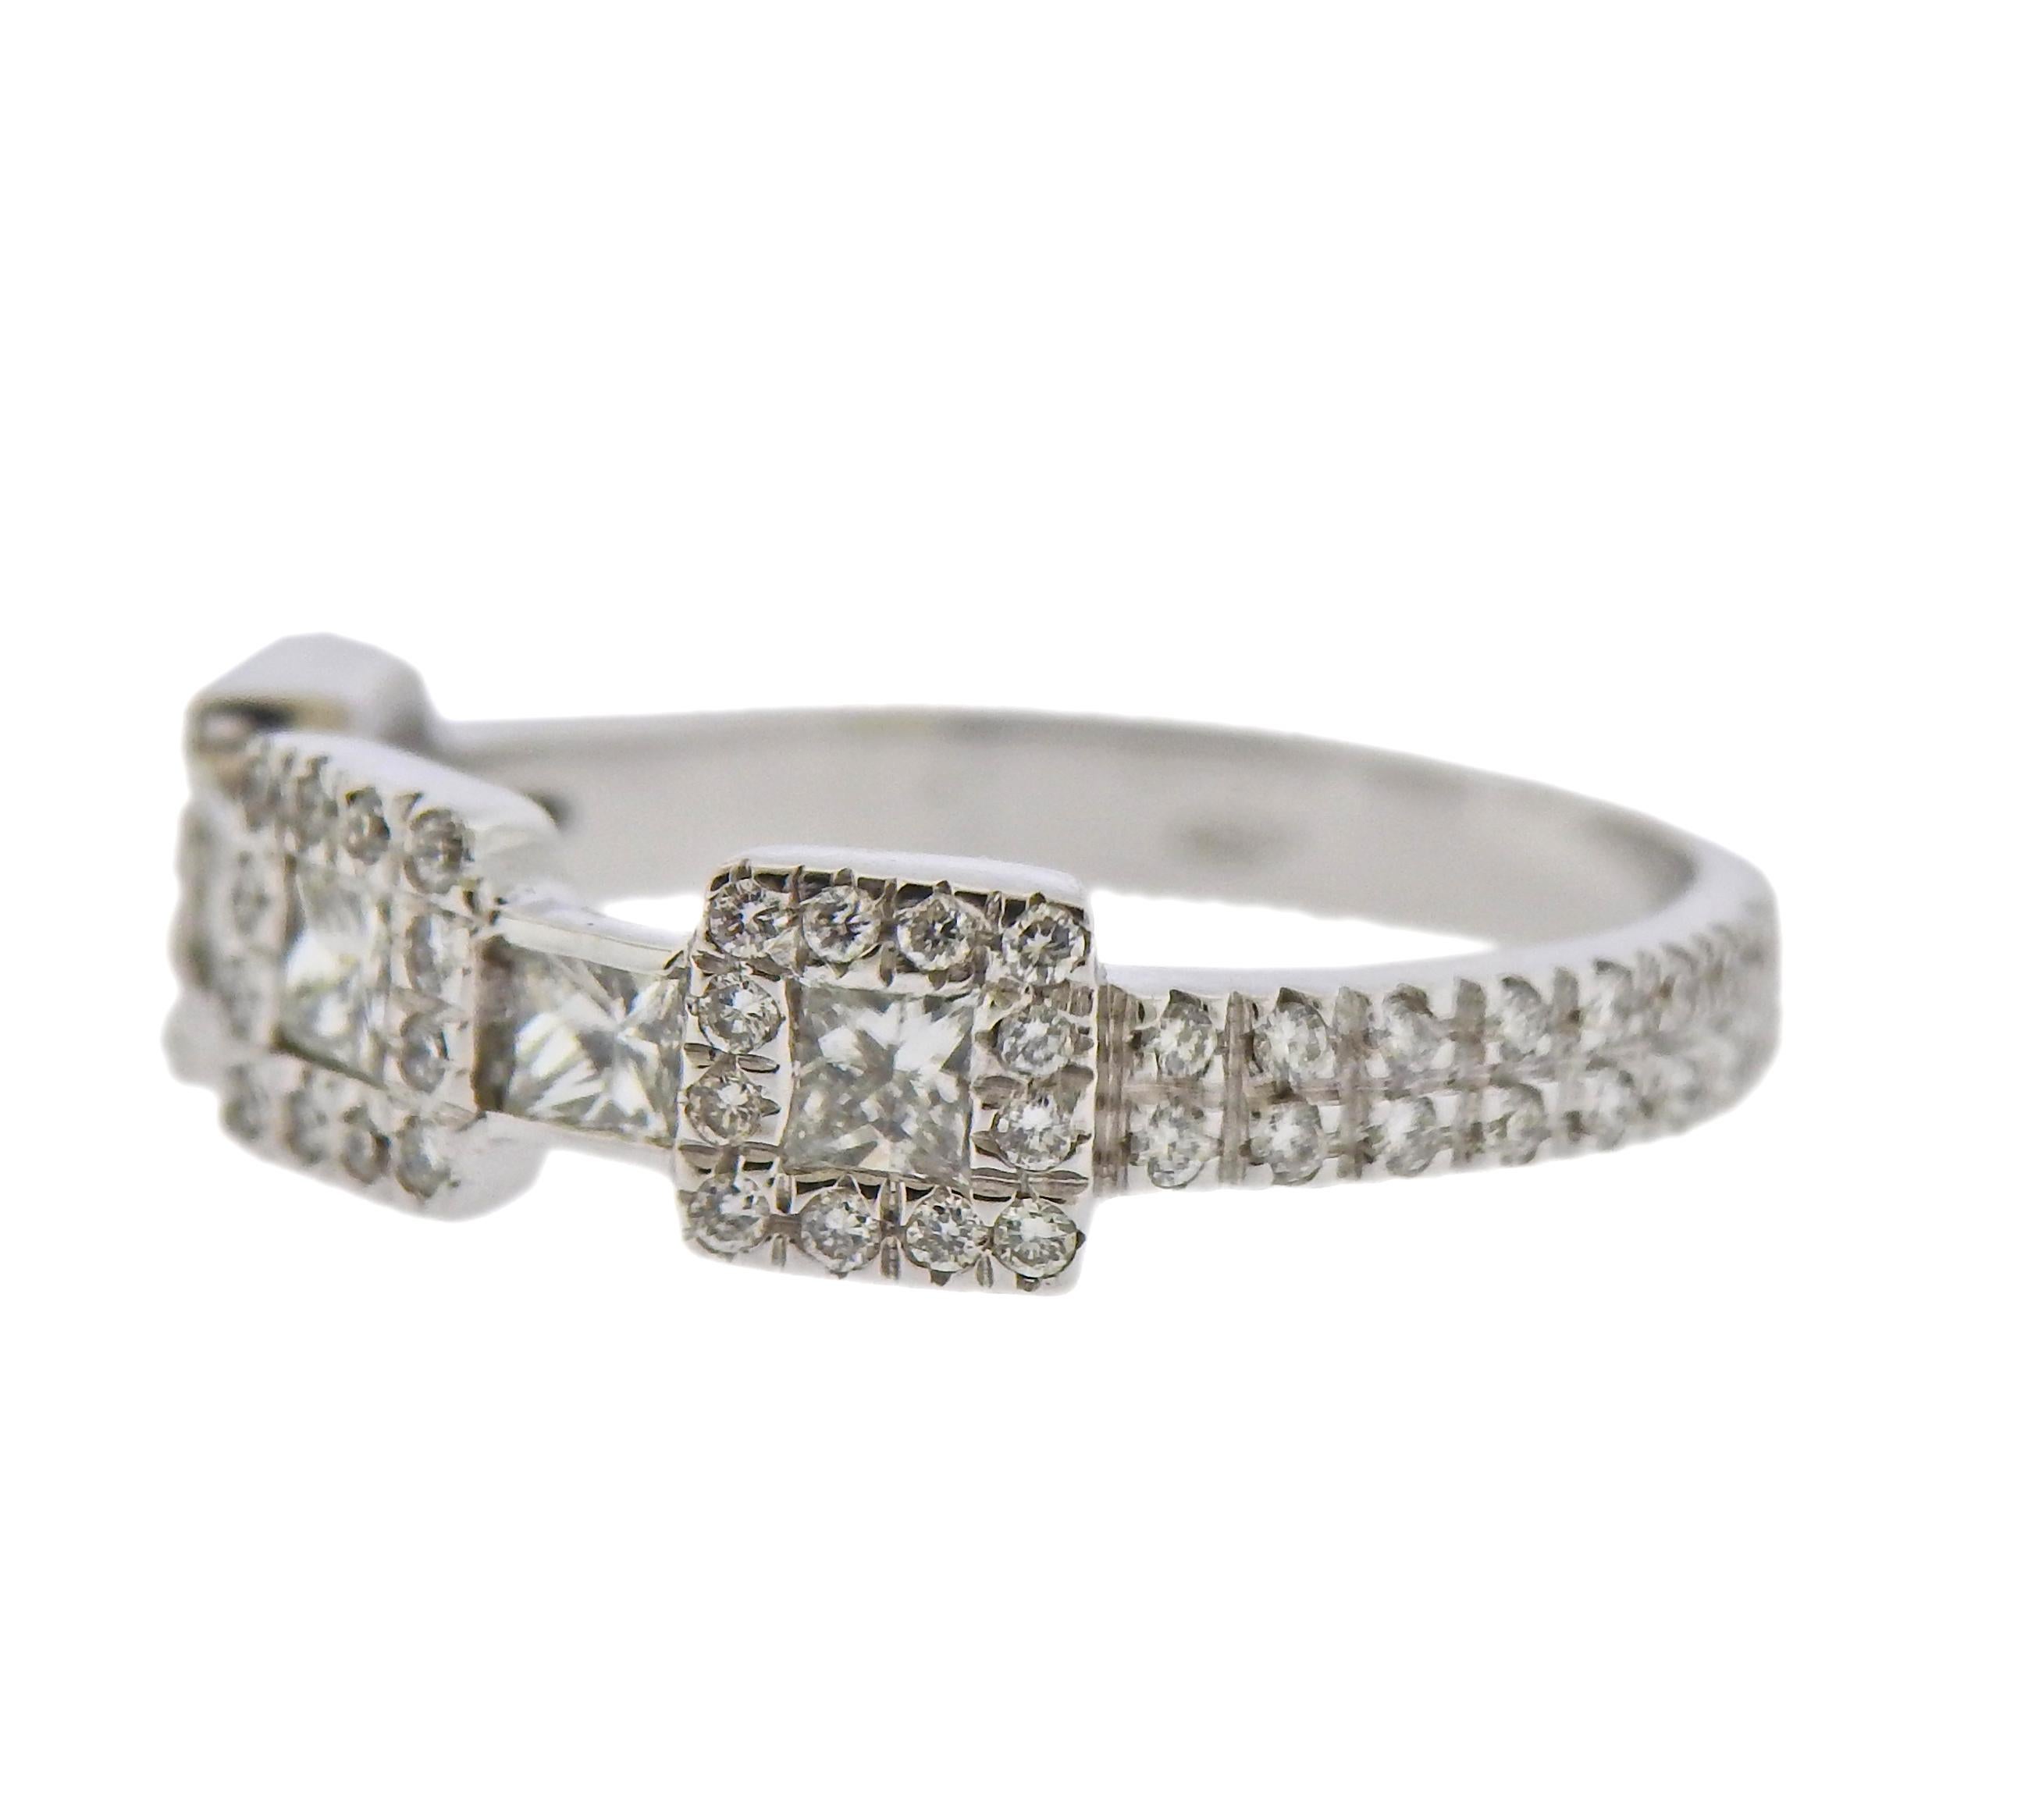 Modern 18k white gold ring, with approx. 0.76ctw in diamonds. Ring size - 7, ring top is 5.7mm wide. Marked 750, and with Italian mark. Weight - 3.8 grams.